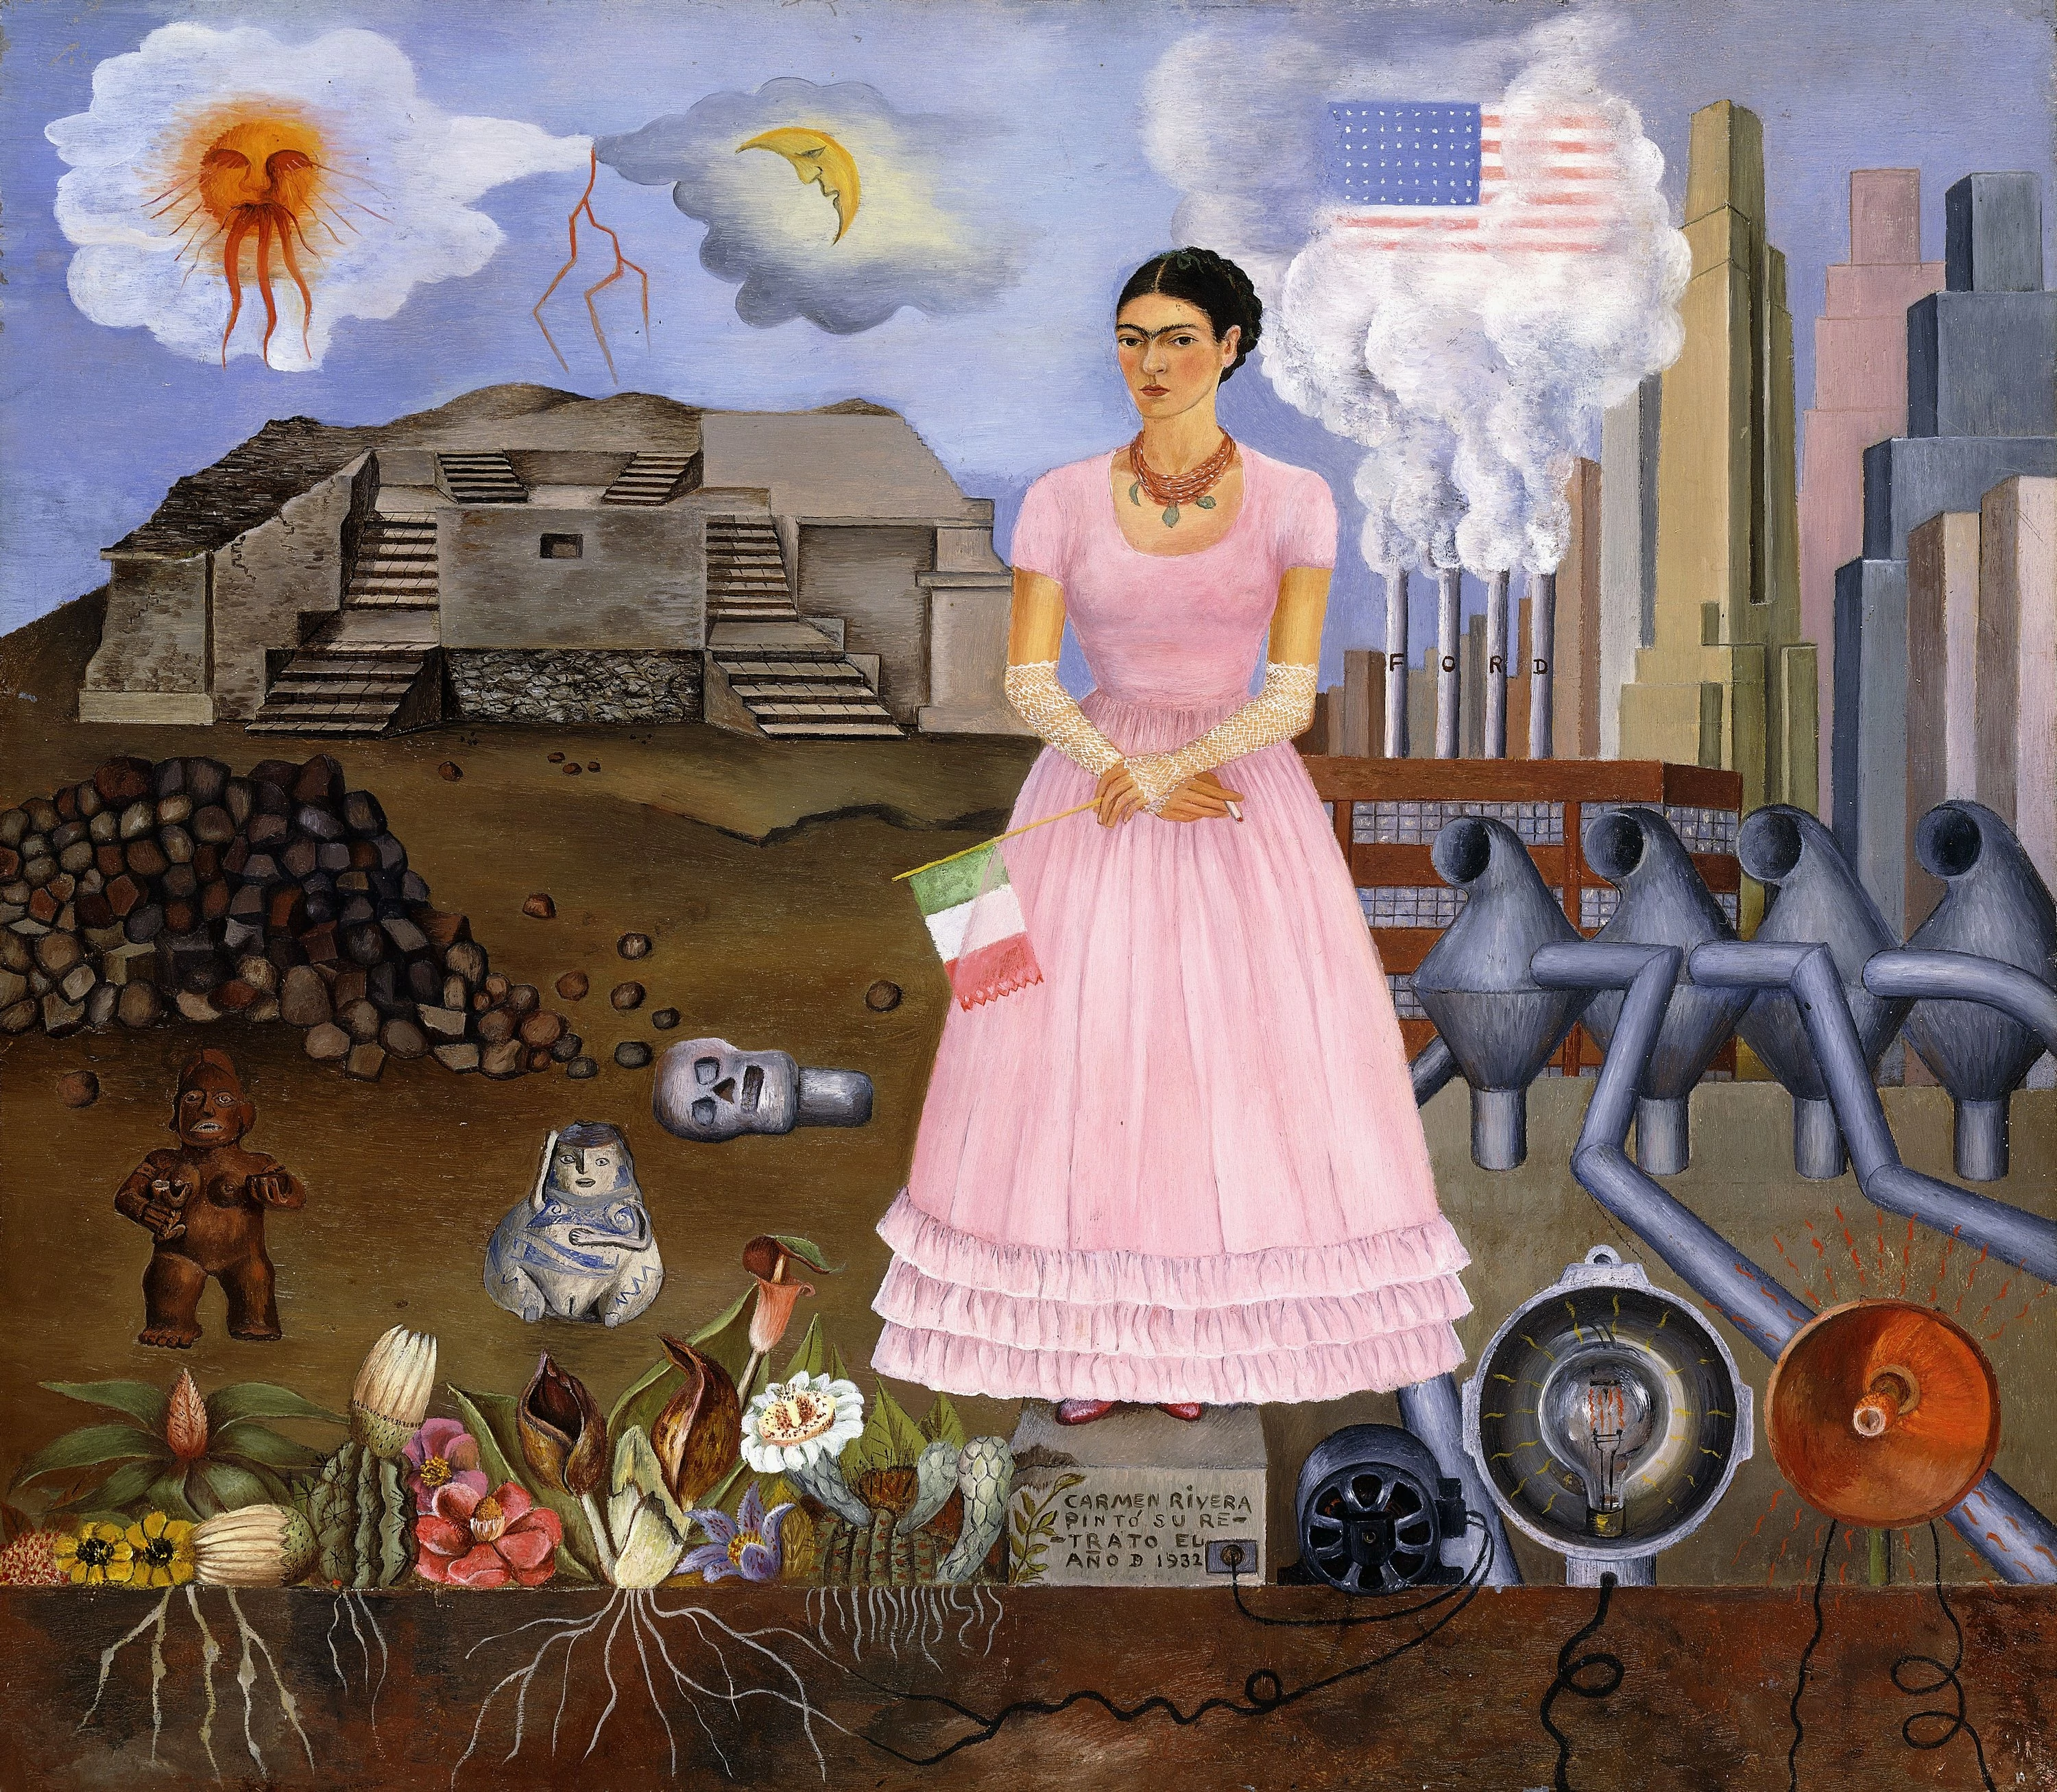 Self-Portrait on the Border Line Between Mexico and the United States, Frida Kahlo